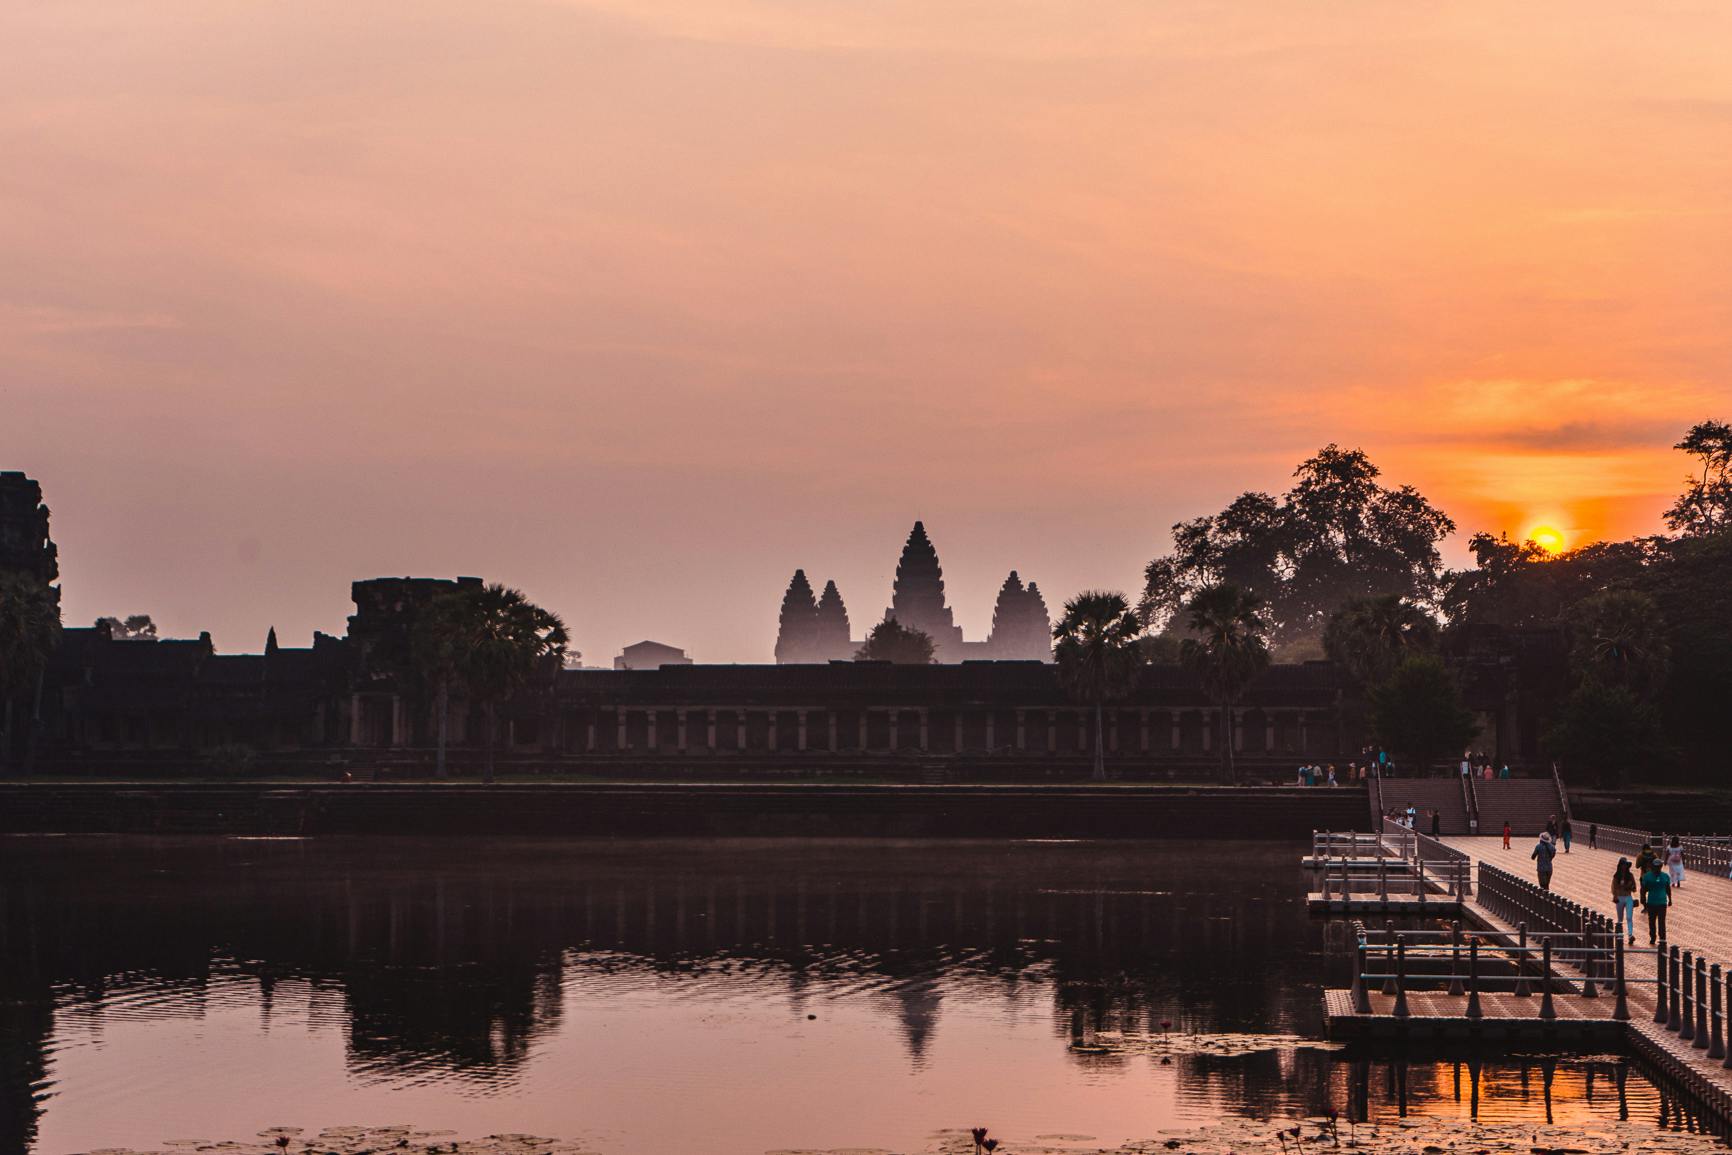 Sunrise at Angkor Wat and complex discovery by 4x4 Musement